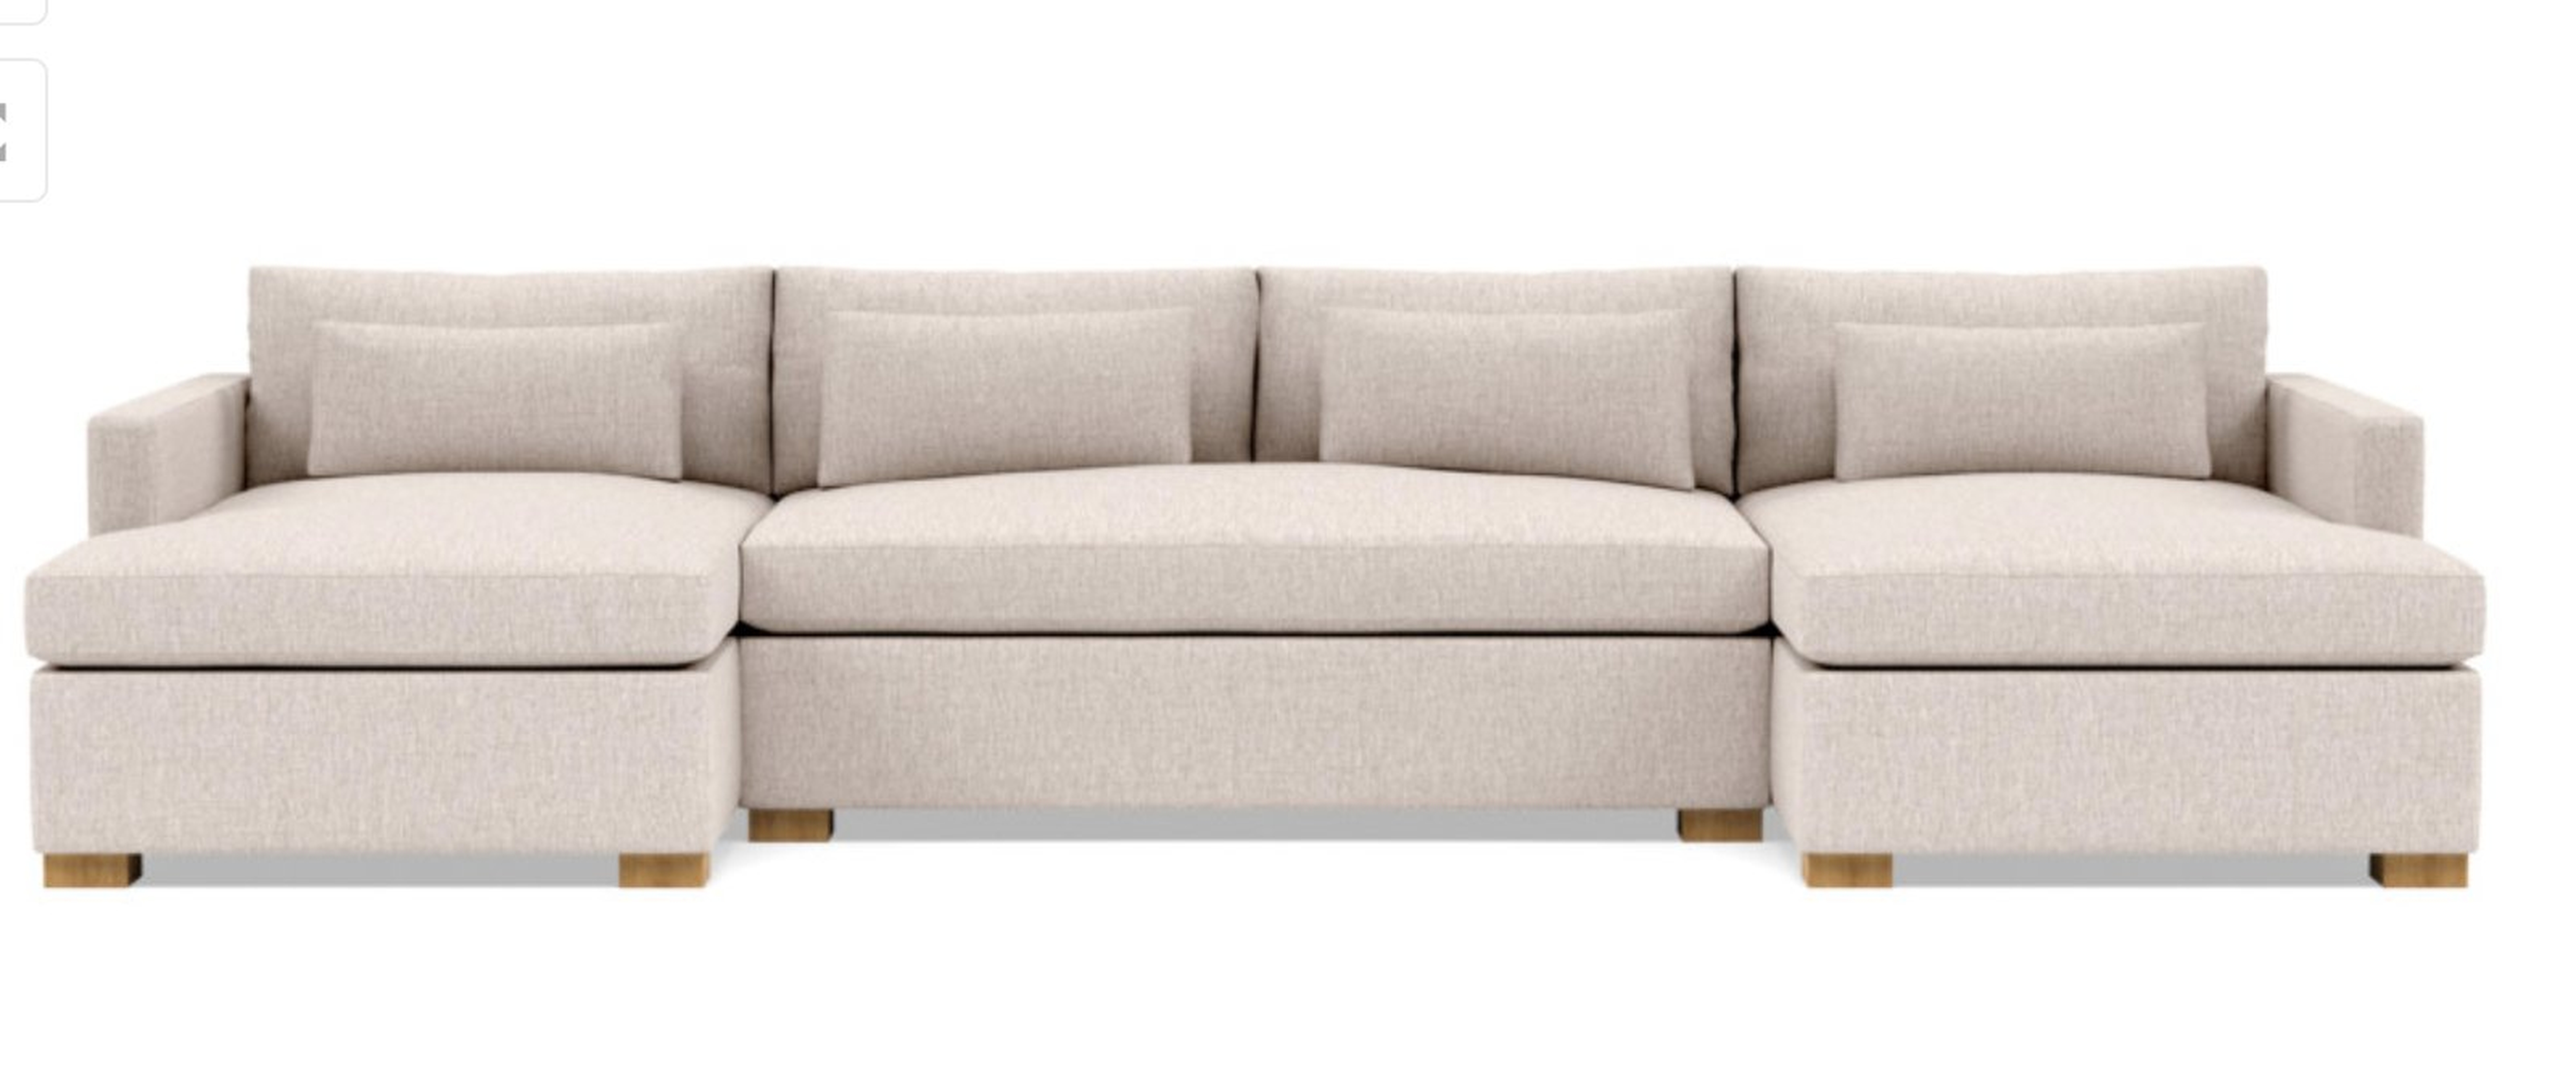 Charly U-Sectional with Beige Wheat Fabric, double down cushions, extended right chaise, extended left chaise, and Natural Oak legs - Interior Define